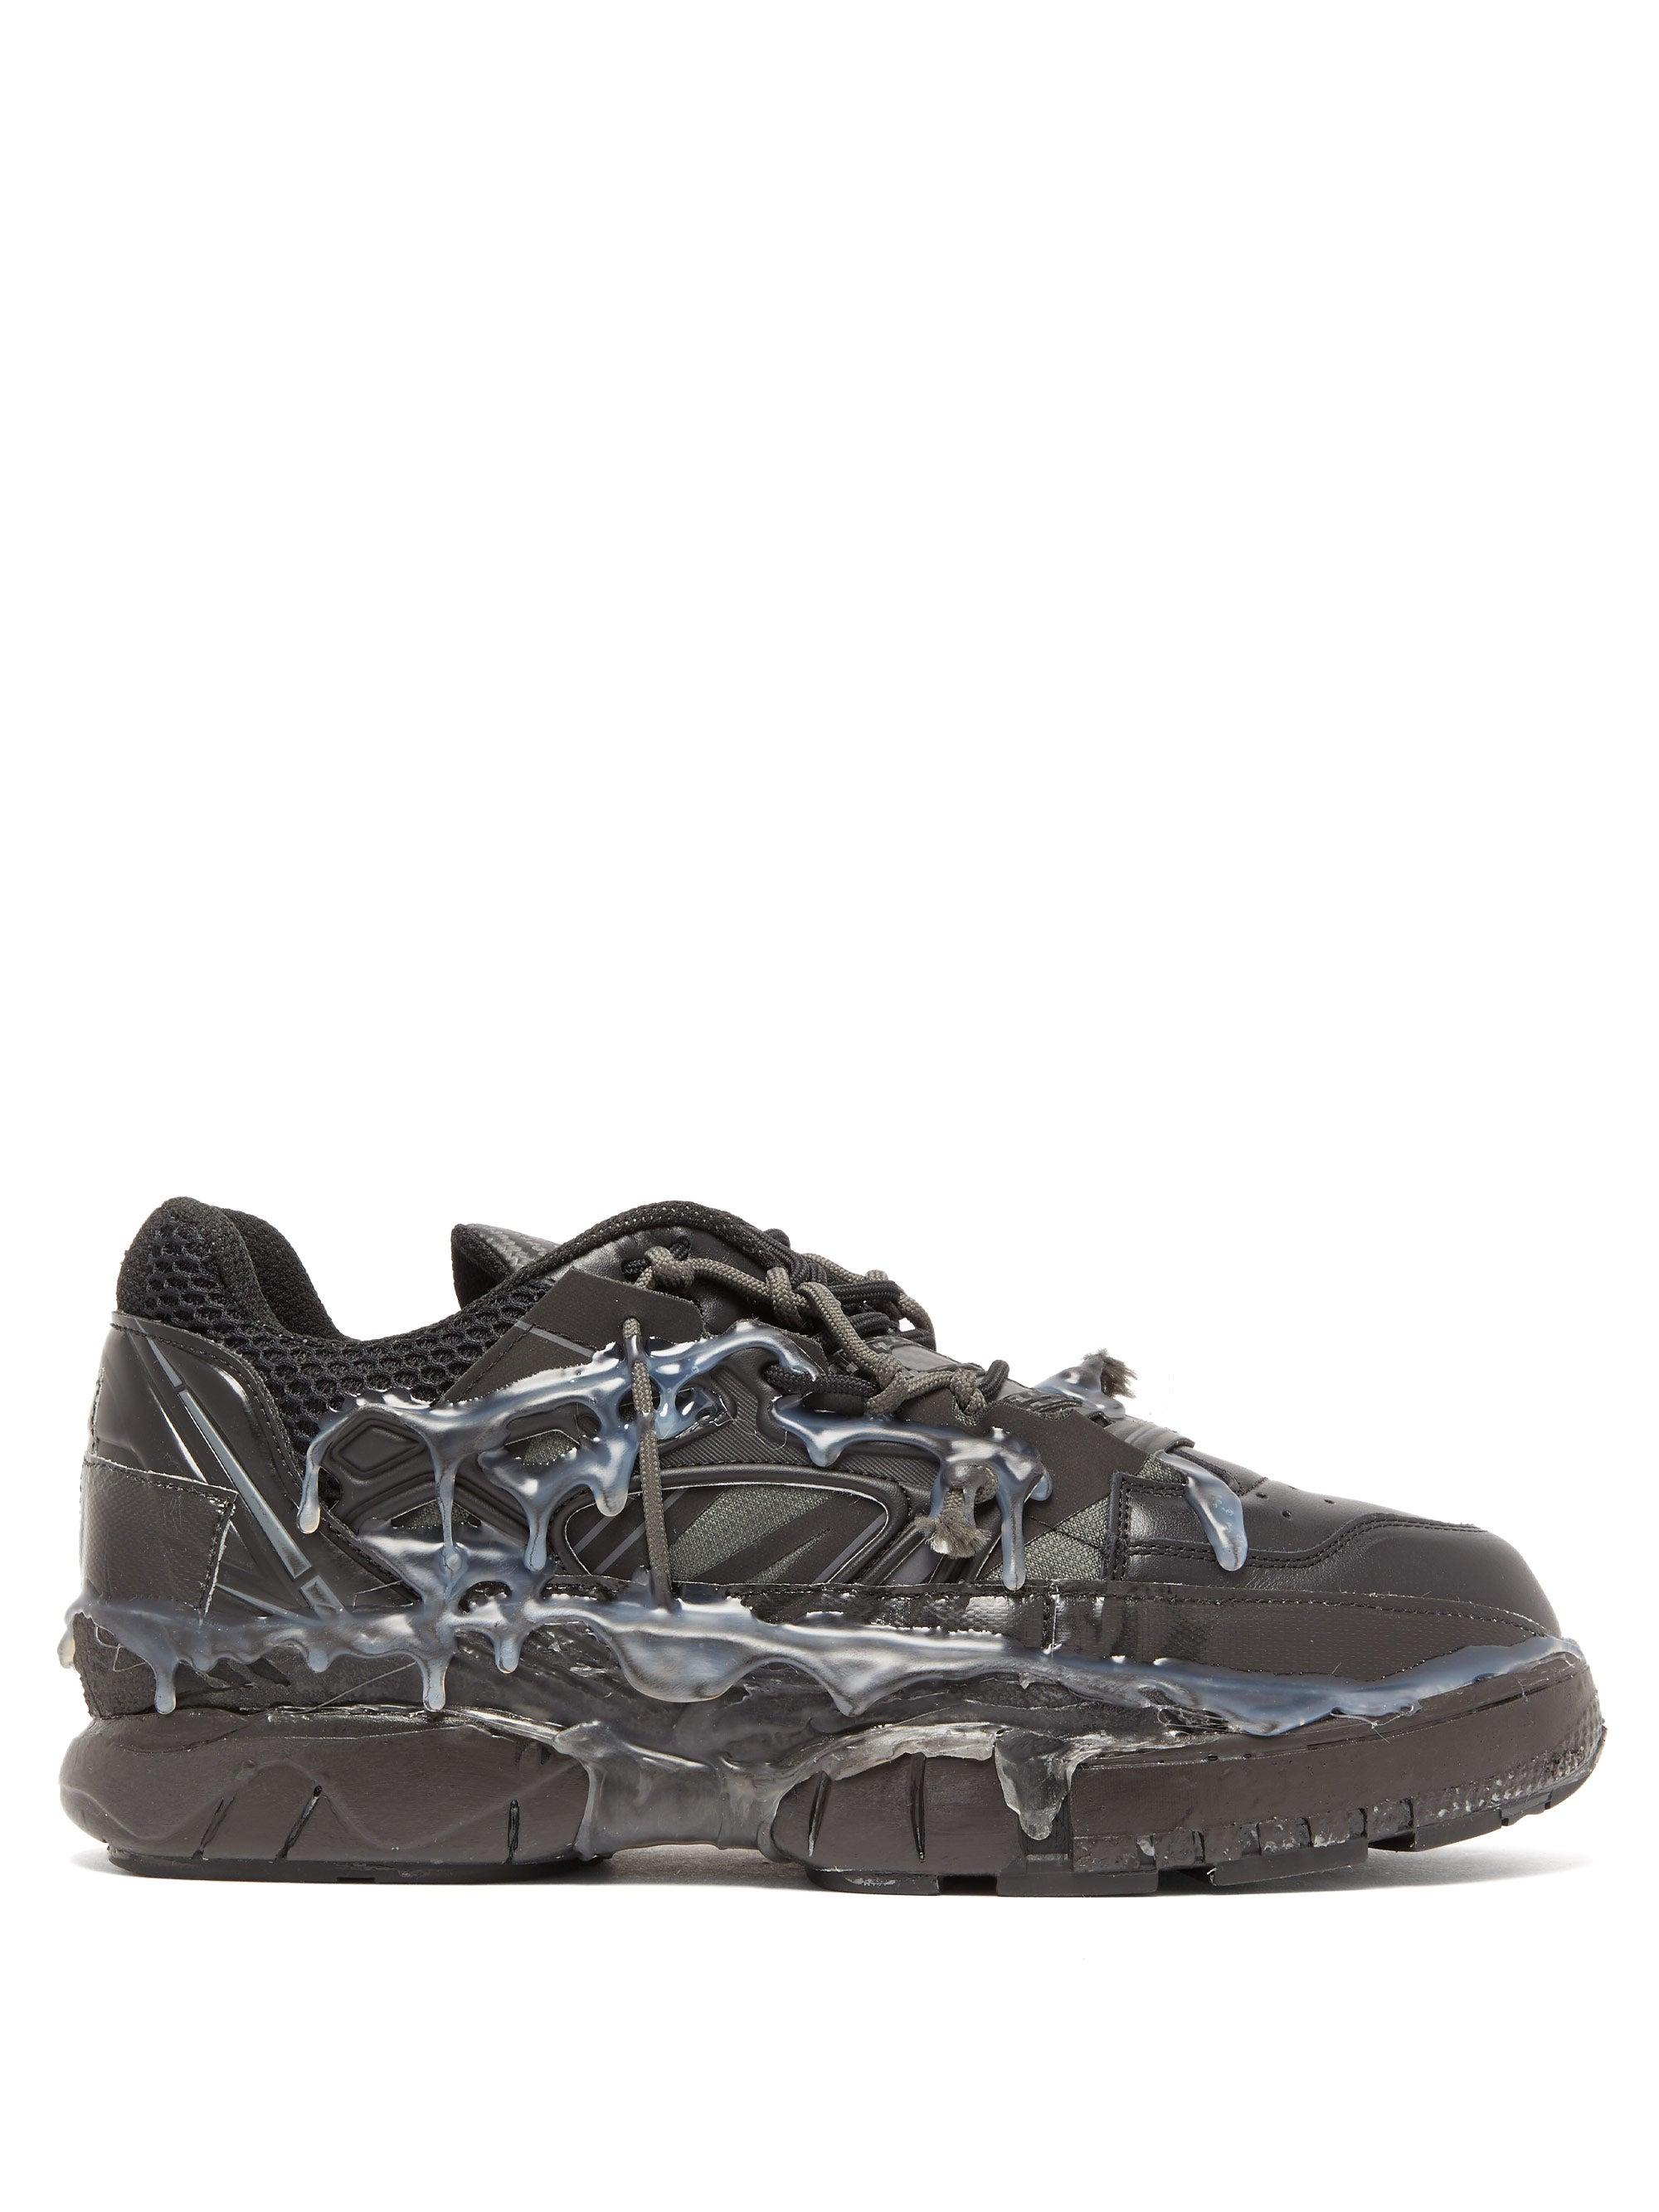 Maison Margiela Fusion Leather And Mesh Trainers in Black for Men - Lyst